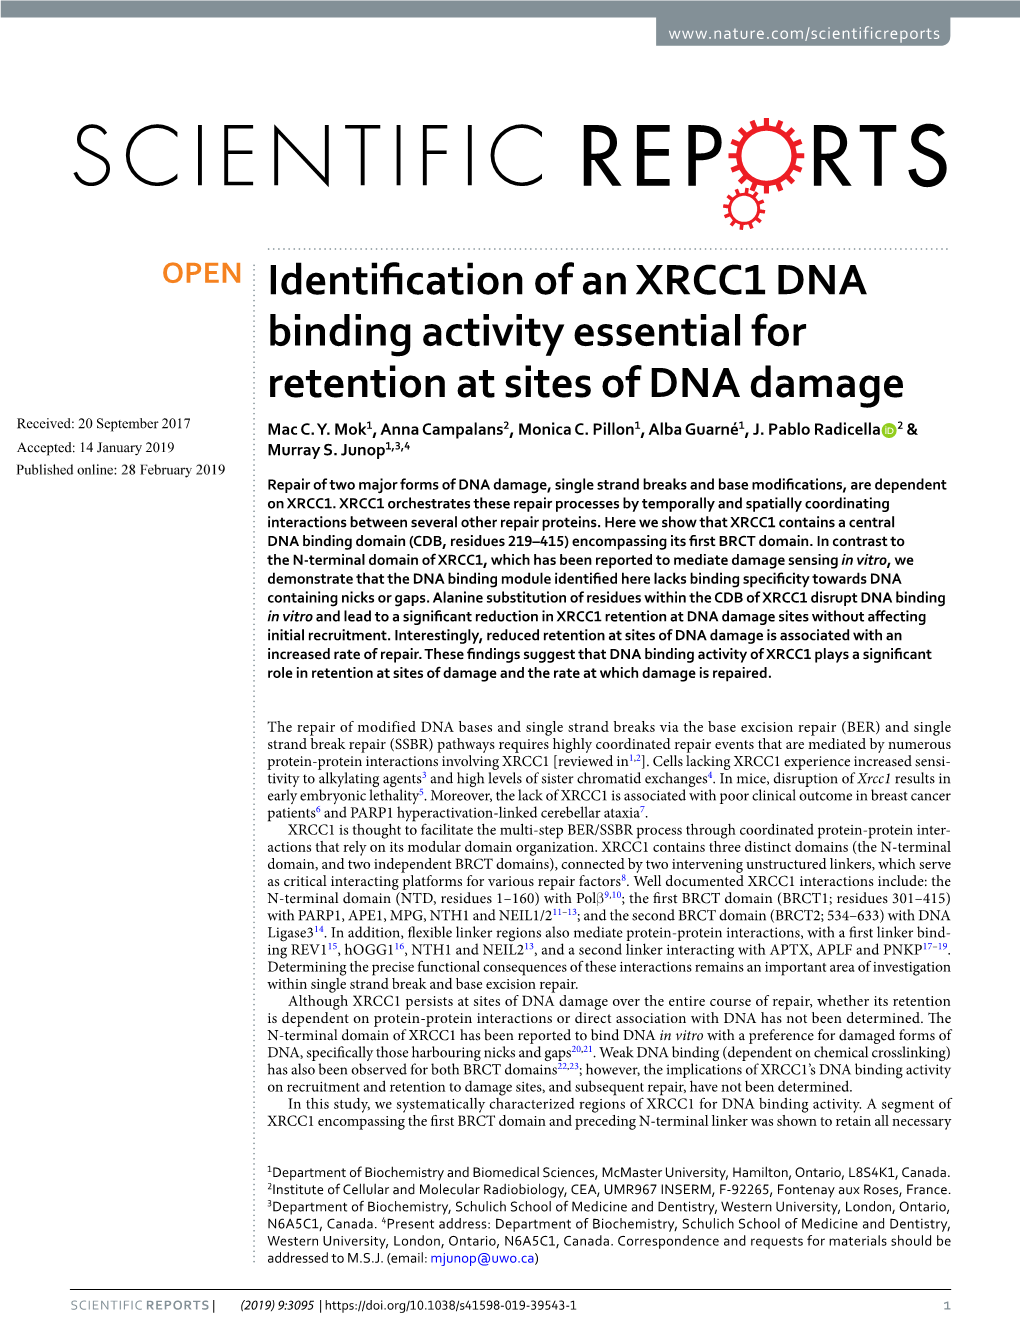 Identification of an XRCC1 DNA Binding Activity Essential For